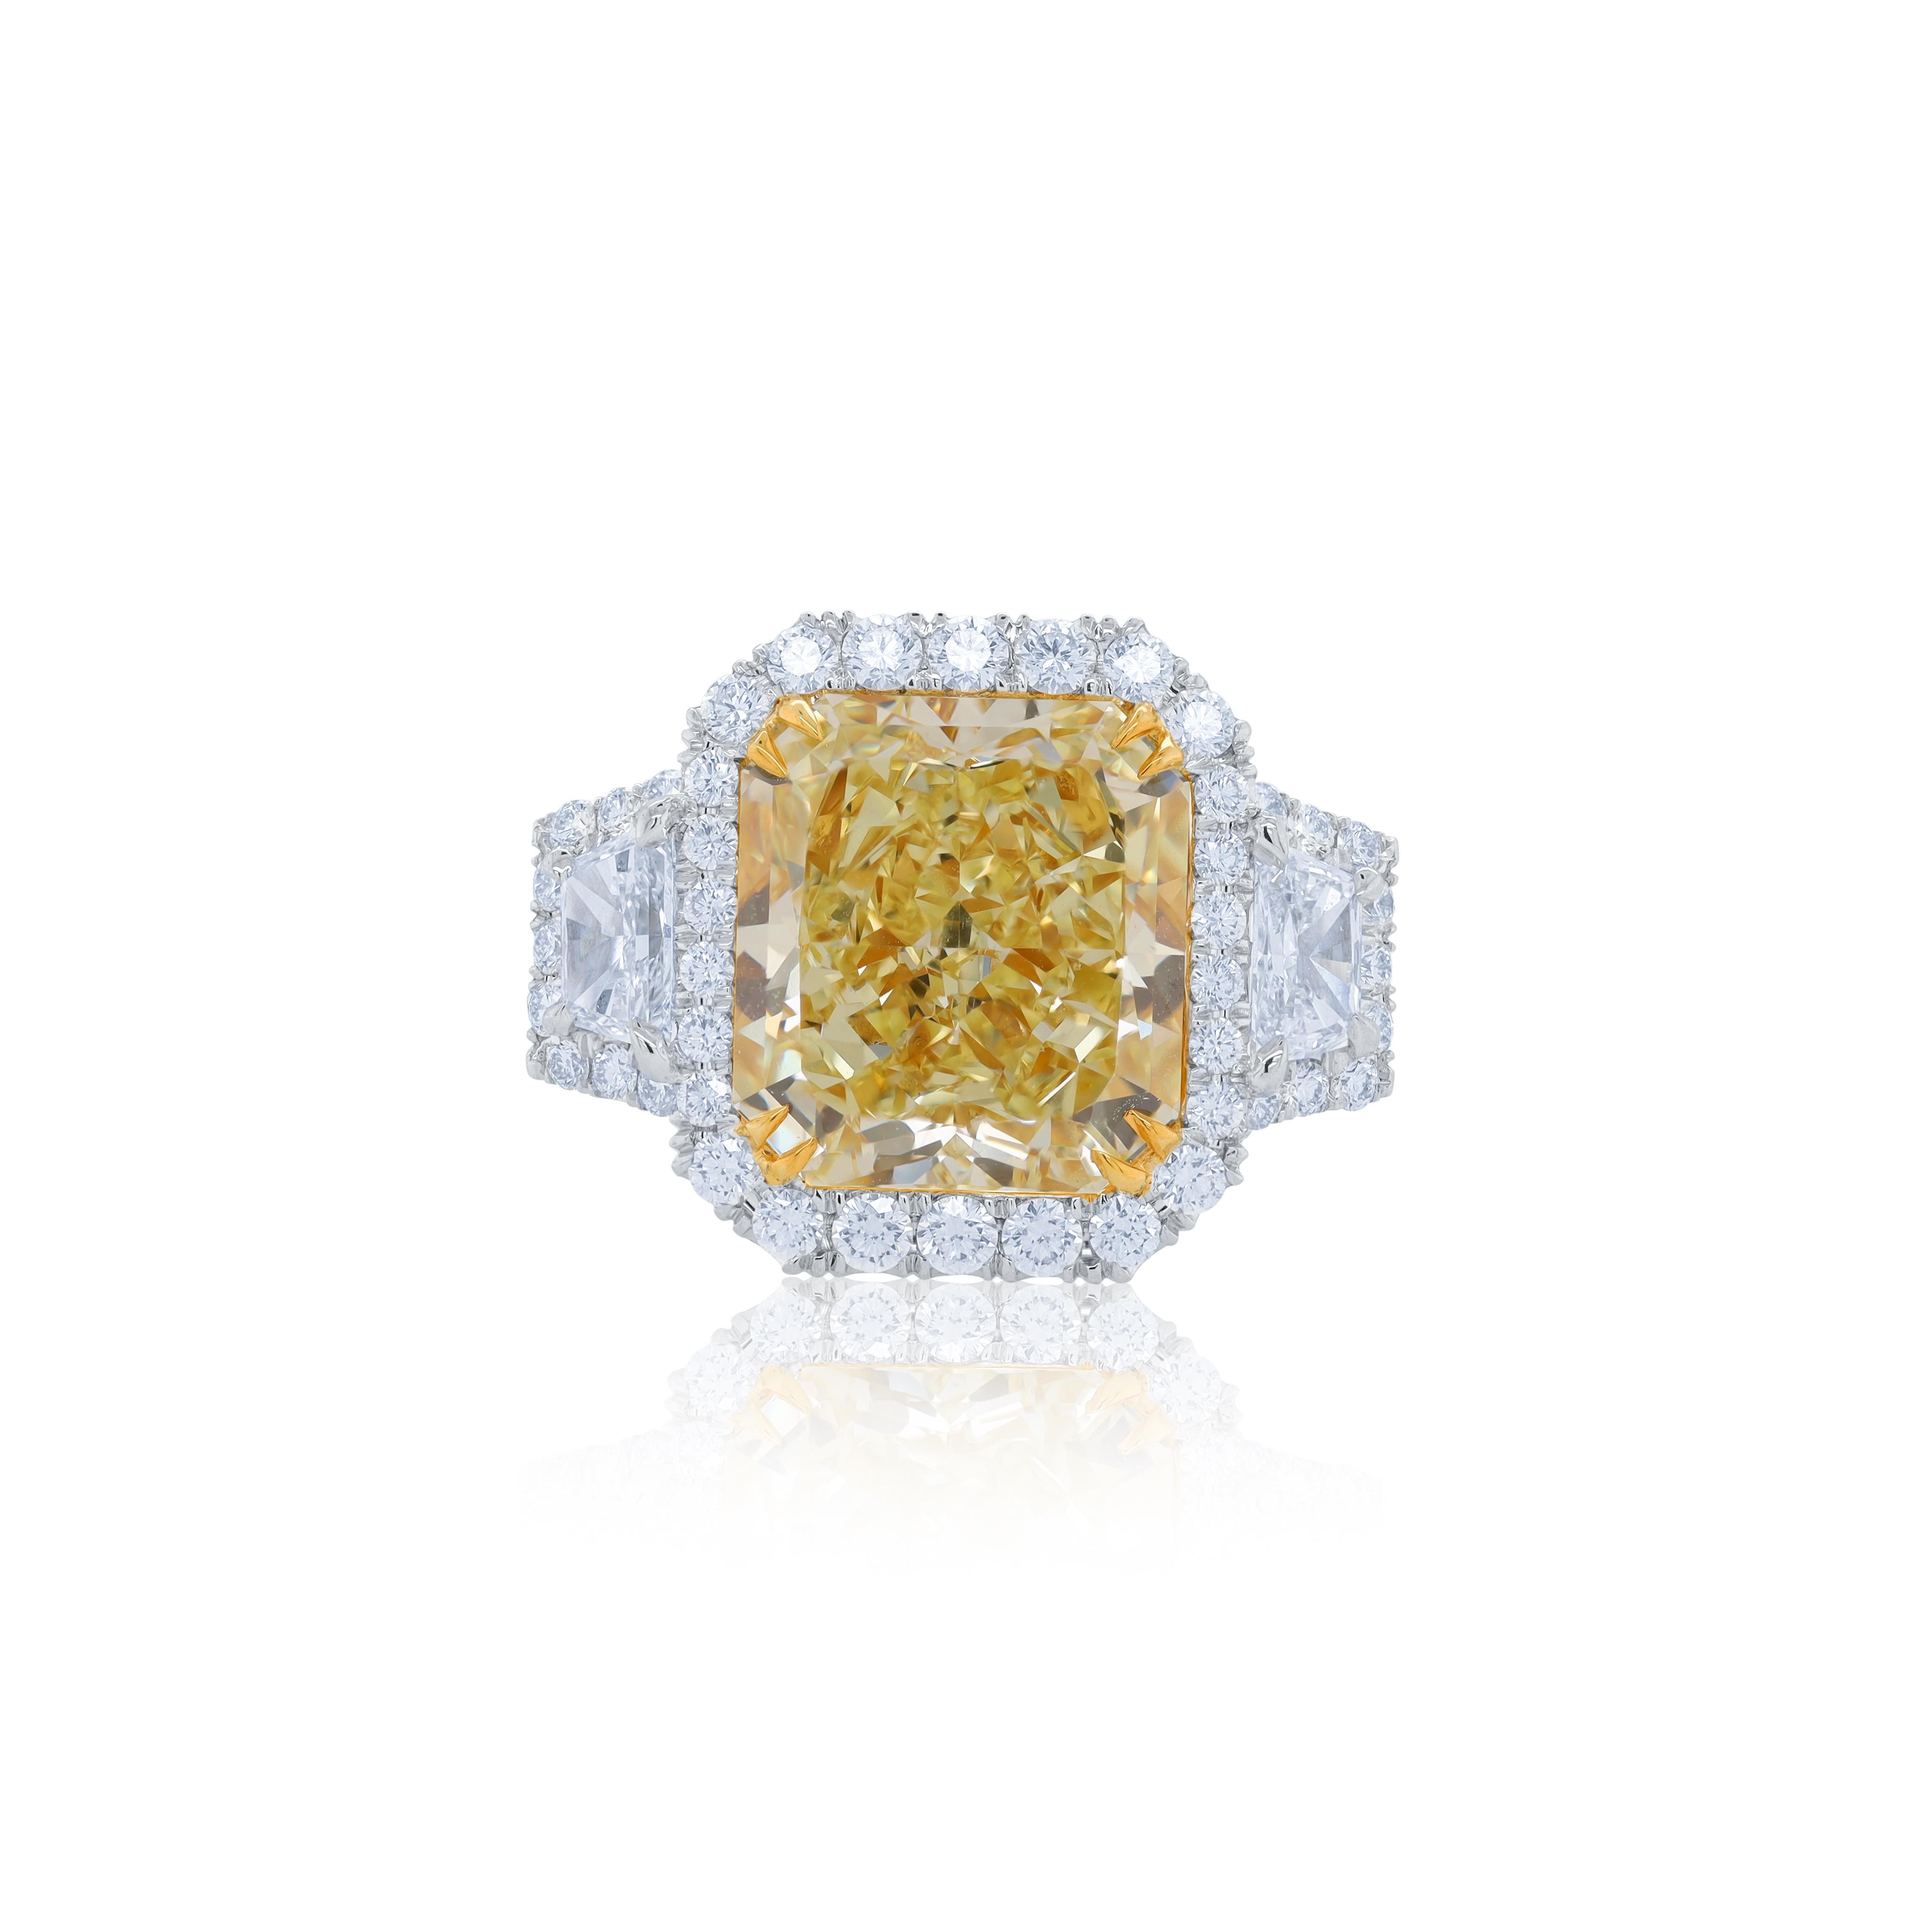 Platinum and 18 kt yellow gold engagement ring featuring a center (FY VVS2) 9.17 ct radiant cut diamond GIA#2135253194 with 2.10 cts tw of trapezoid and round diamonds around 
Diana M is one-stop shop for all your jewelry shopping, carrying line of